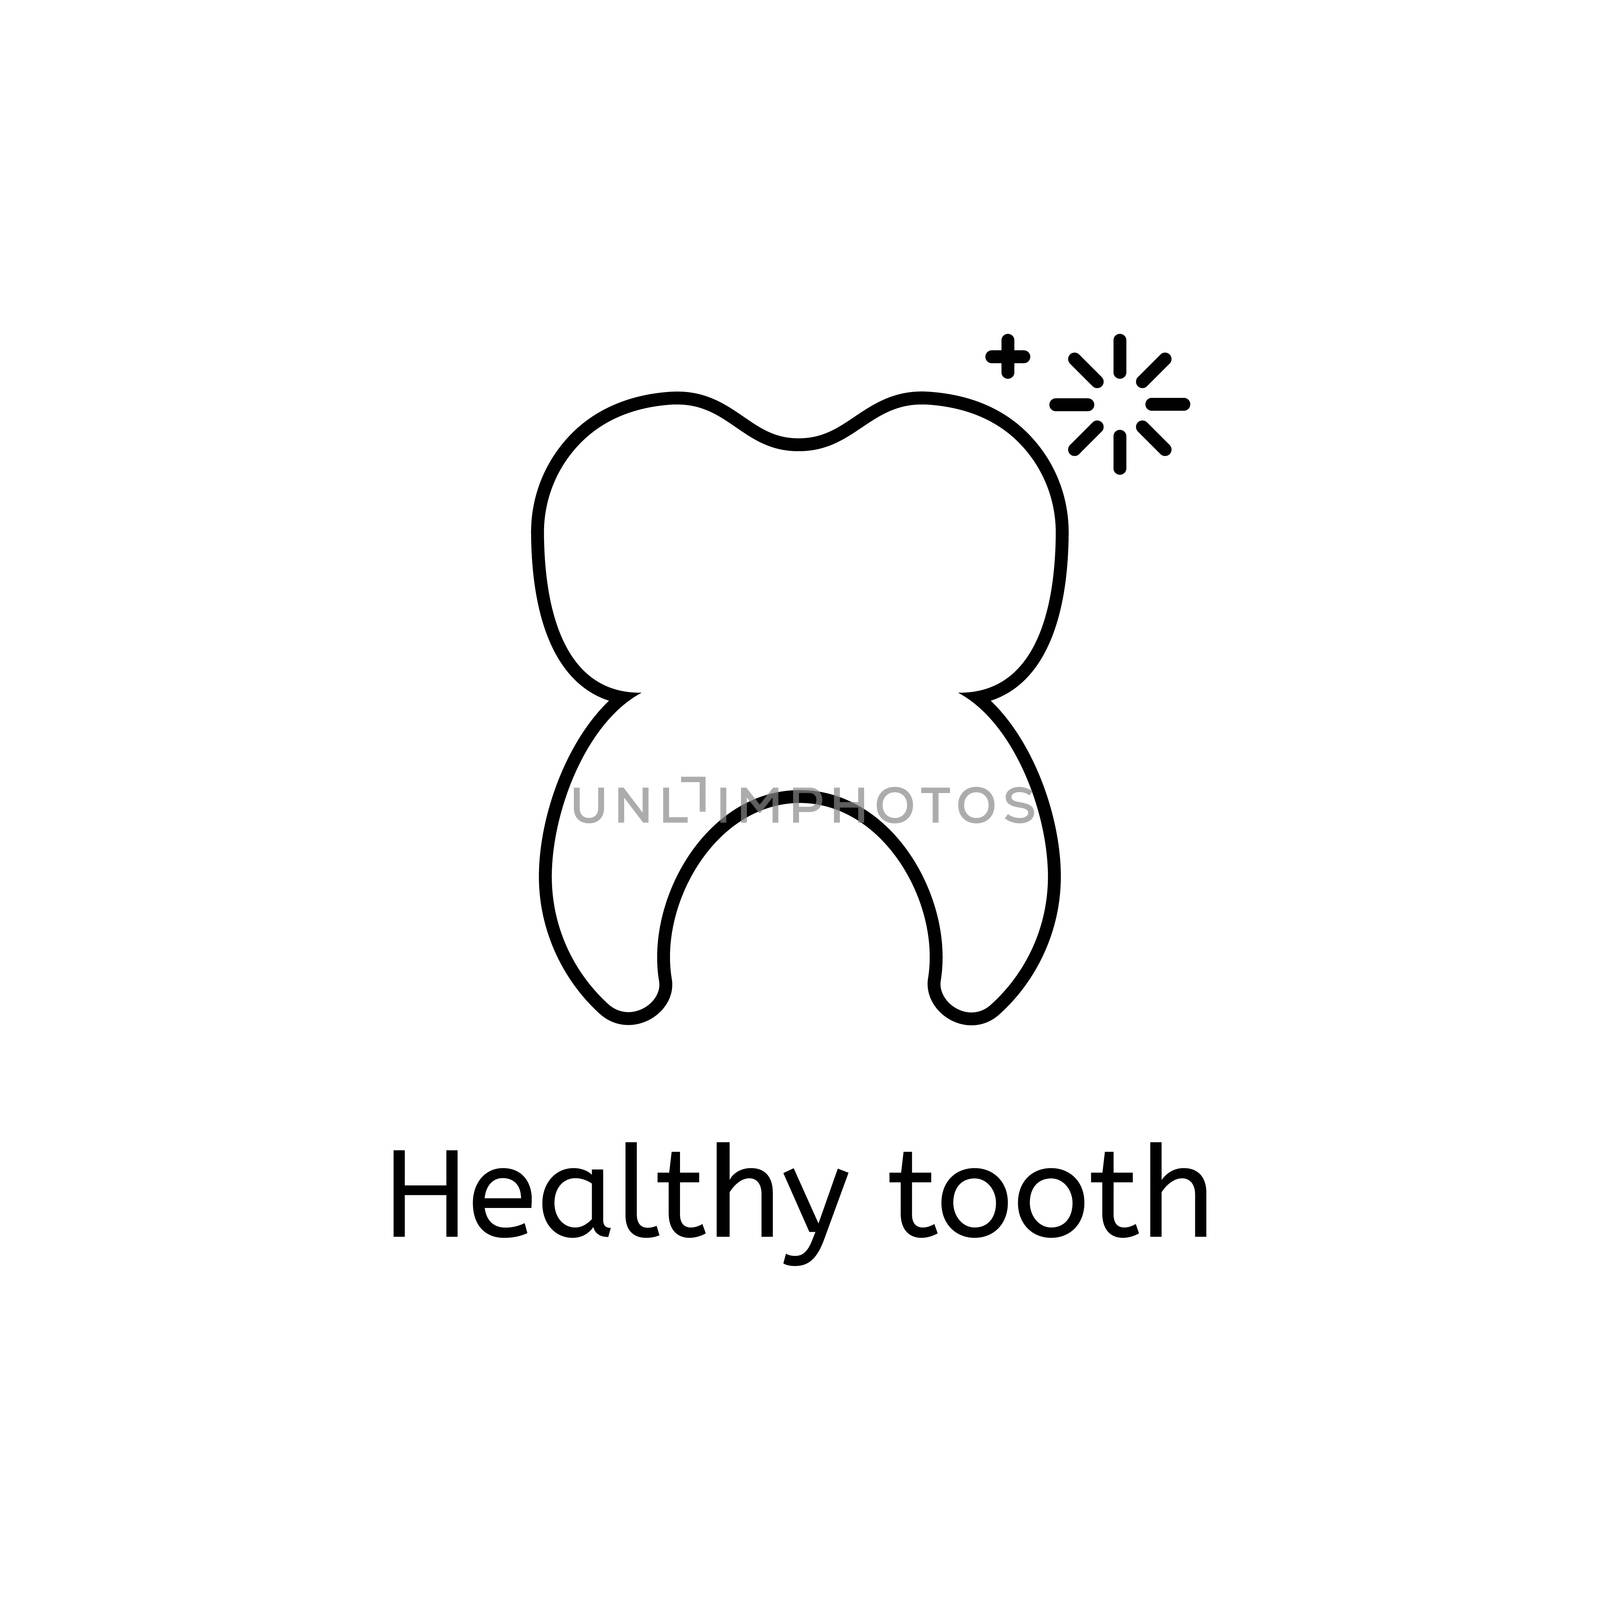  healthy tooth on a white background. Thin line icon for web site, visit card, poster, banner etc.